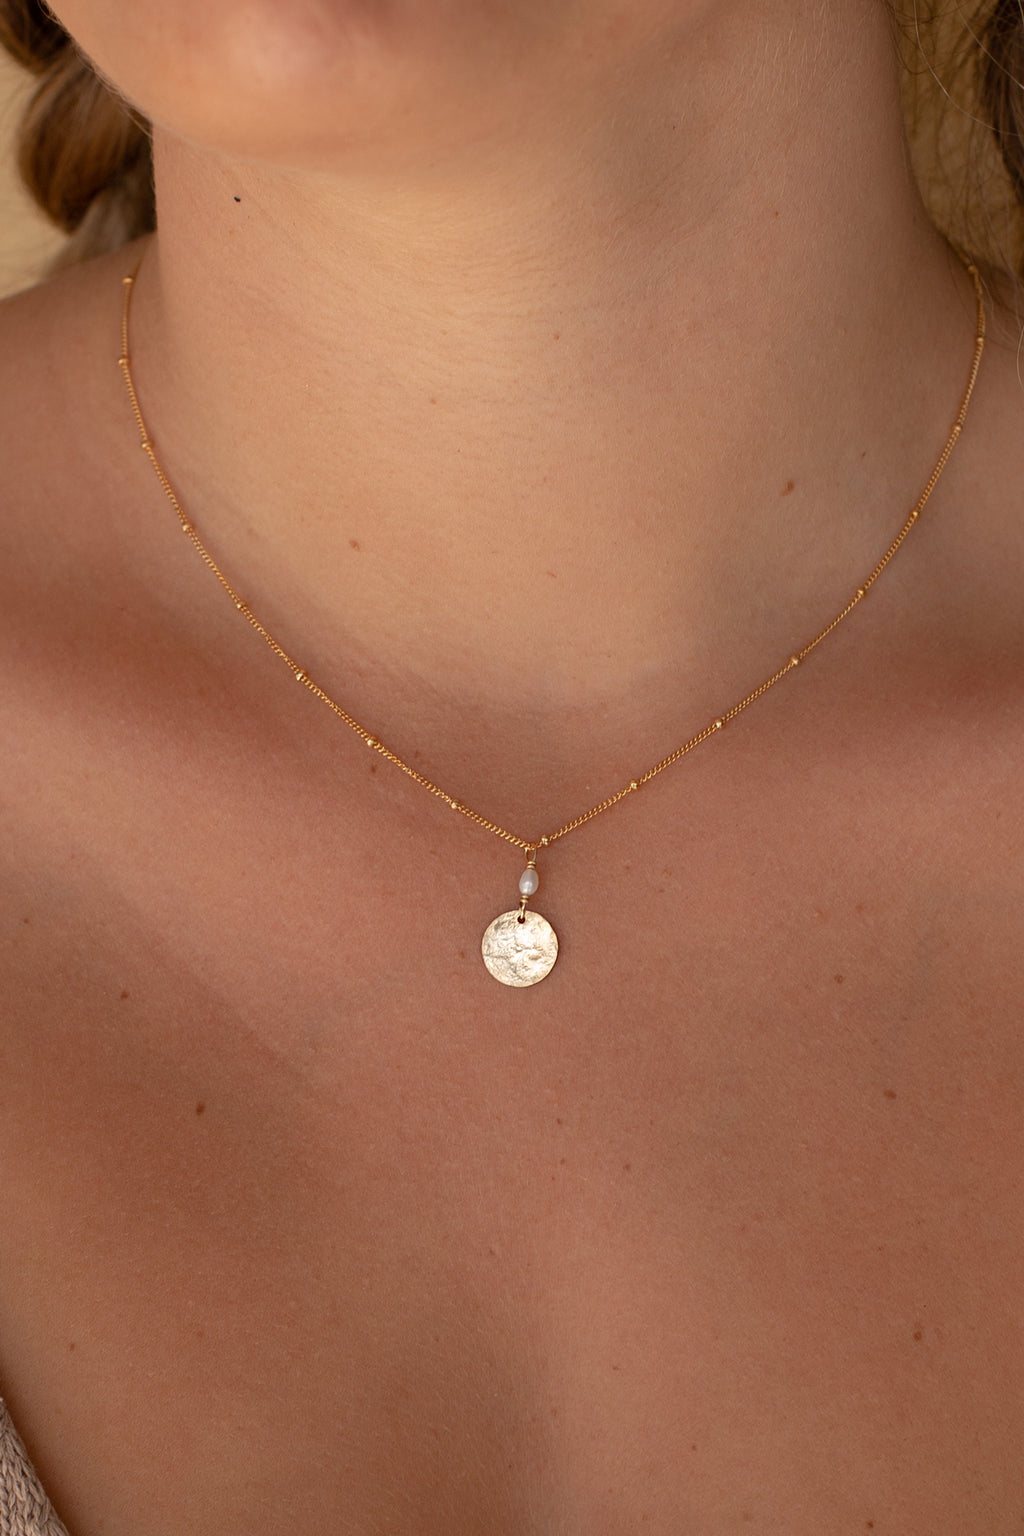 Pearl Large Moon Necklace- Satellite-Gold fill